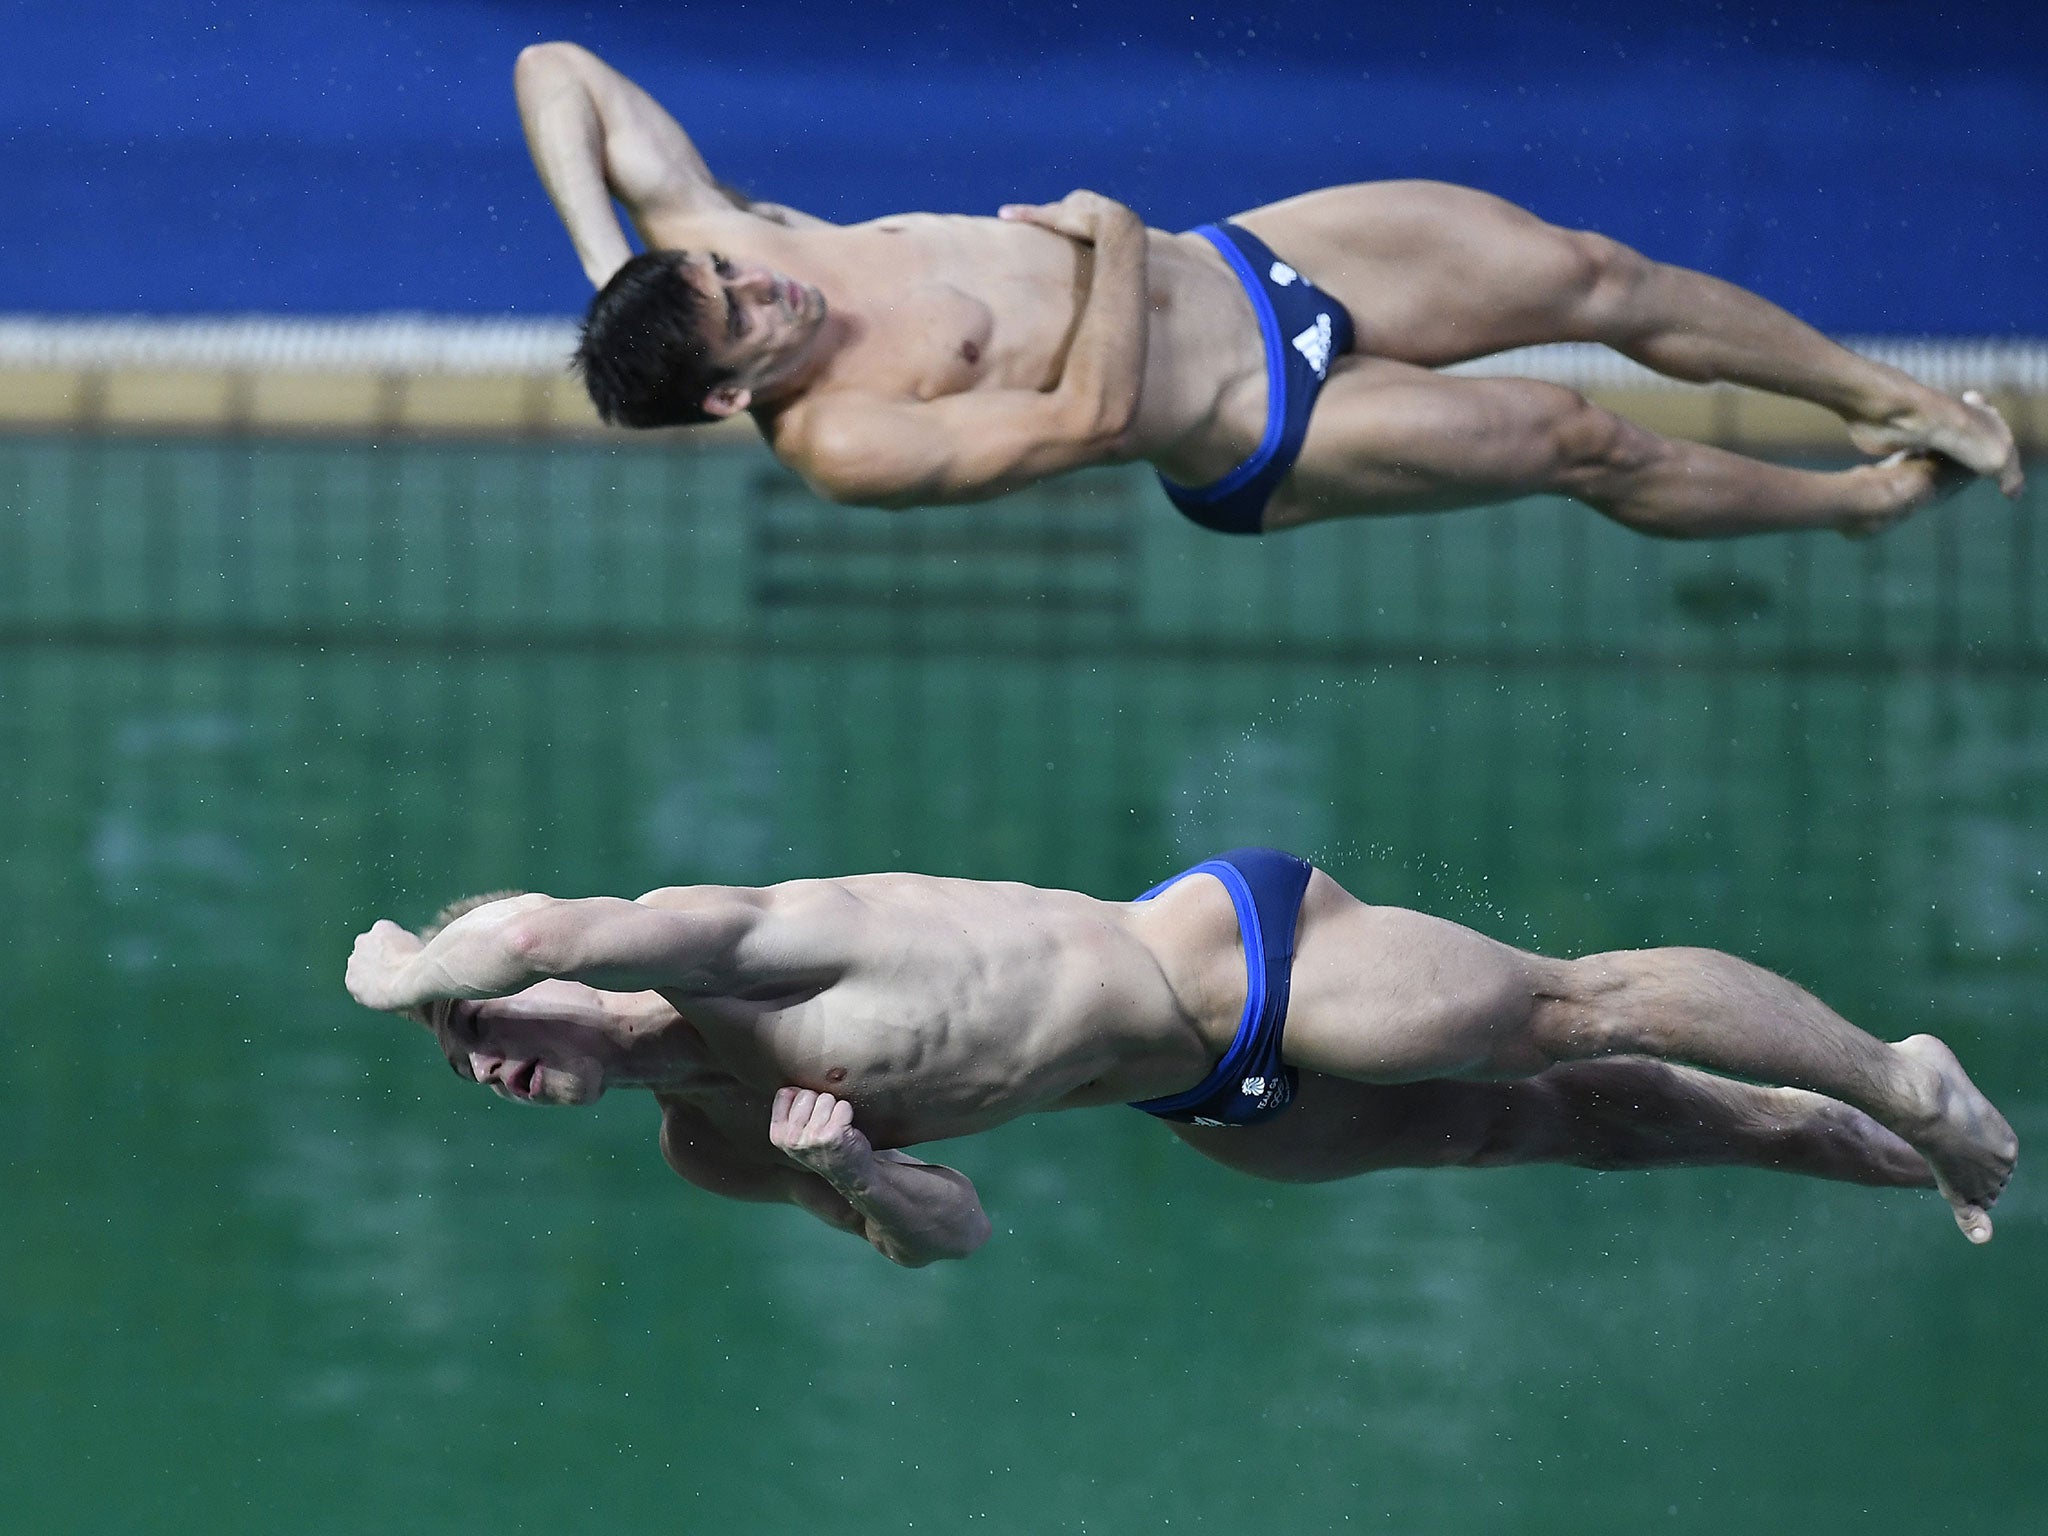 Laugher and Mears competing in the 3m synchro diving